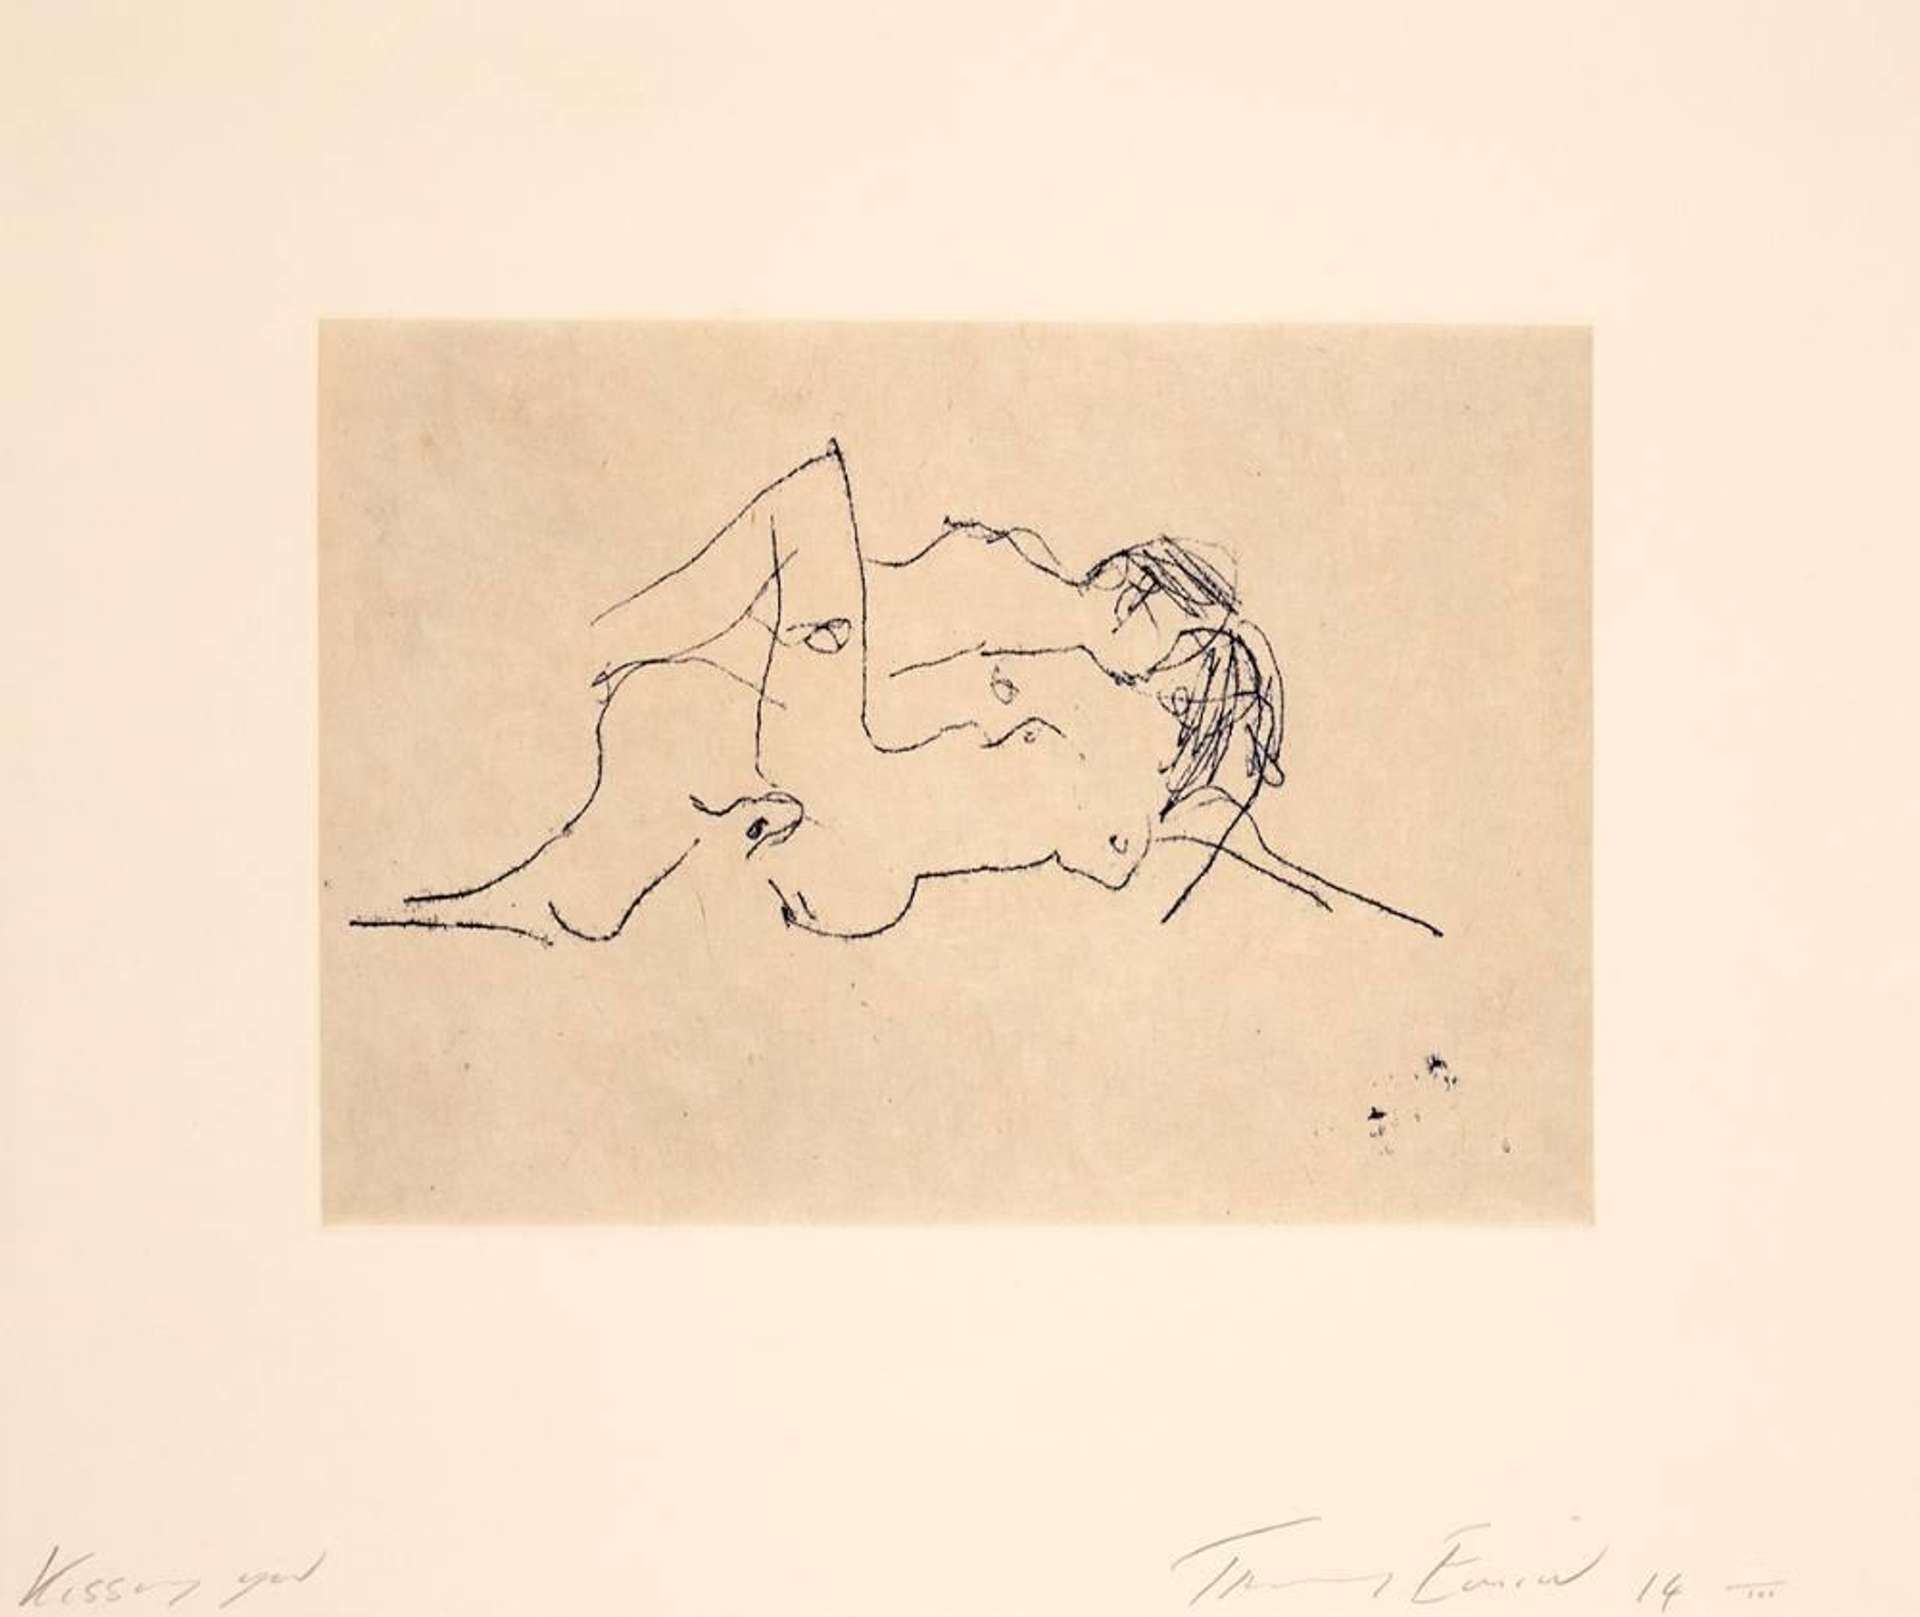 Kissing You by Tracey Emin